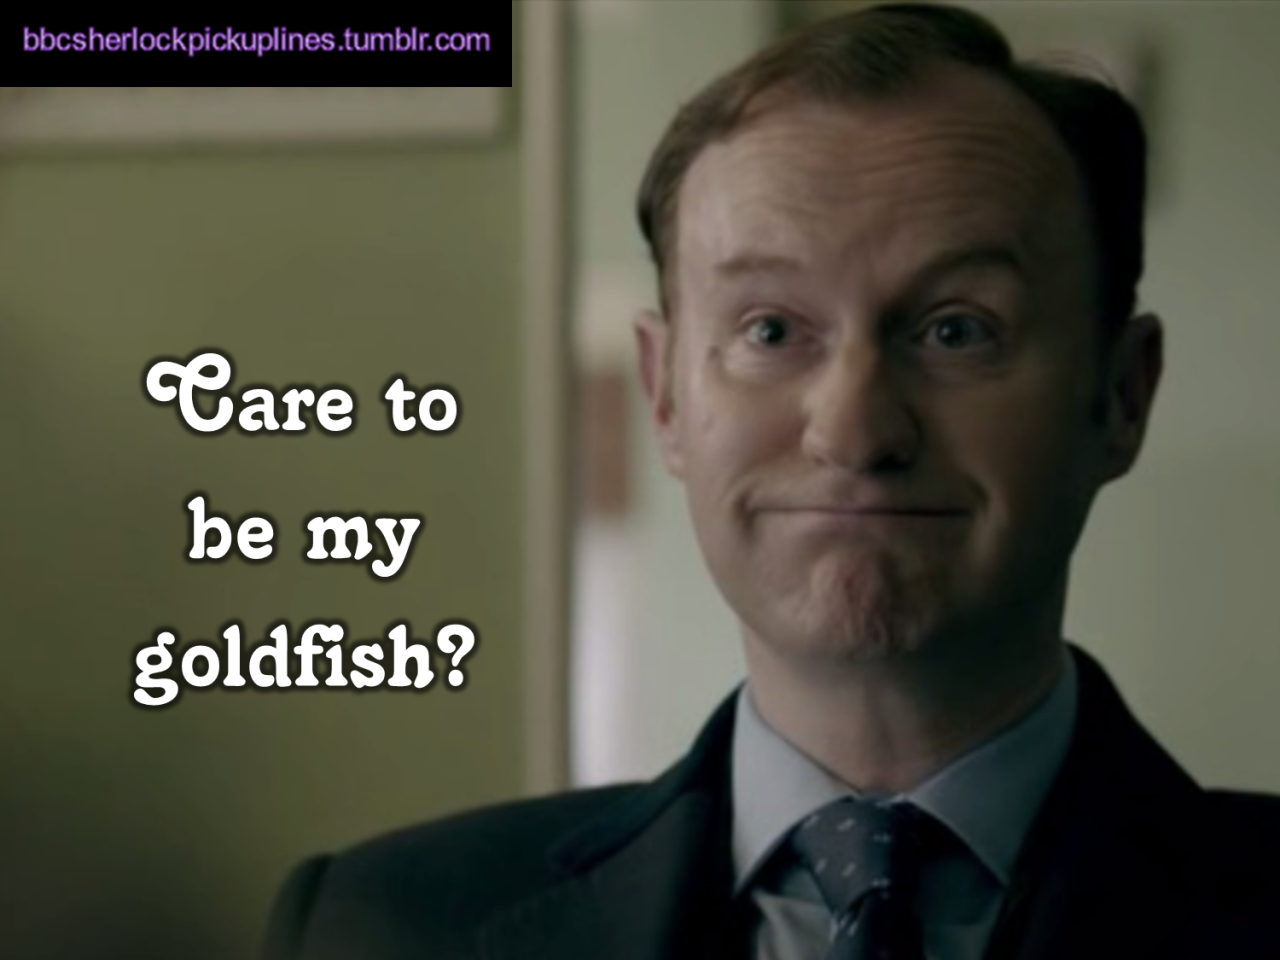 The best of series three (so far!) from BBC Sherlock Pick-Up Lines. Happy Valentine&rsquo;s